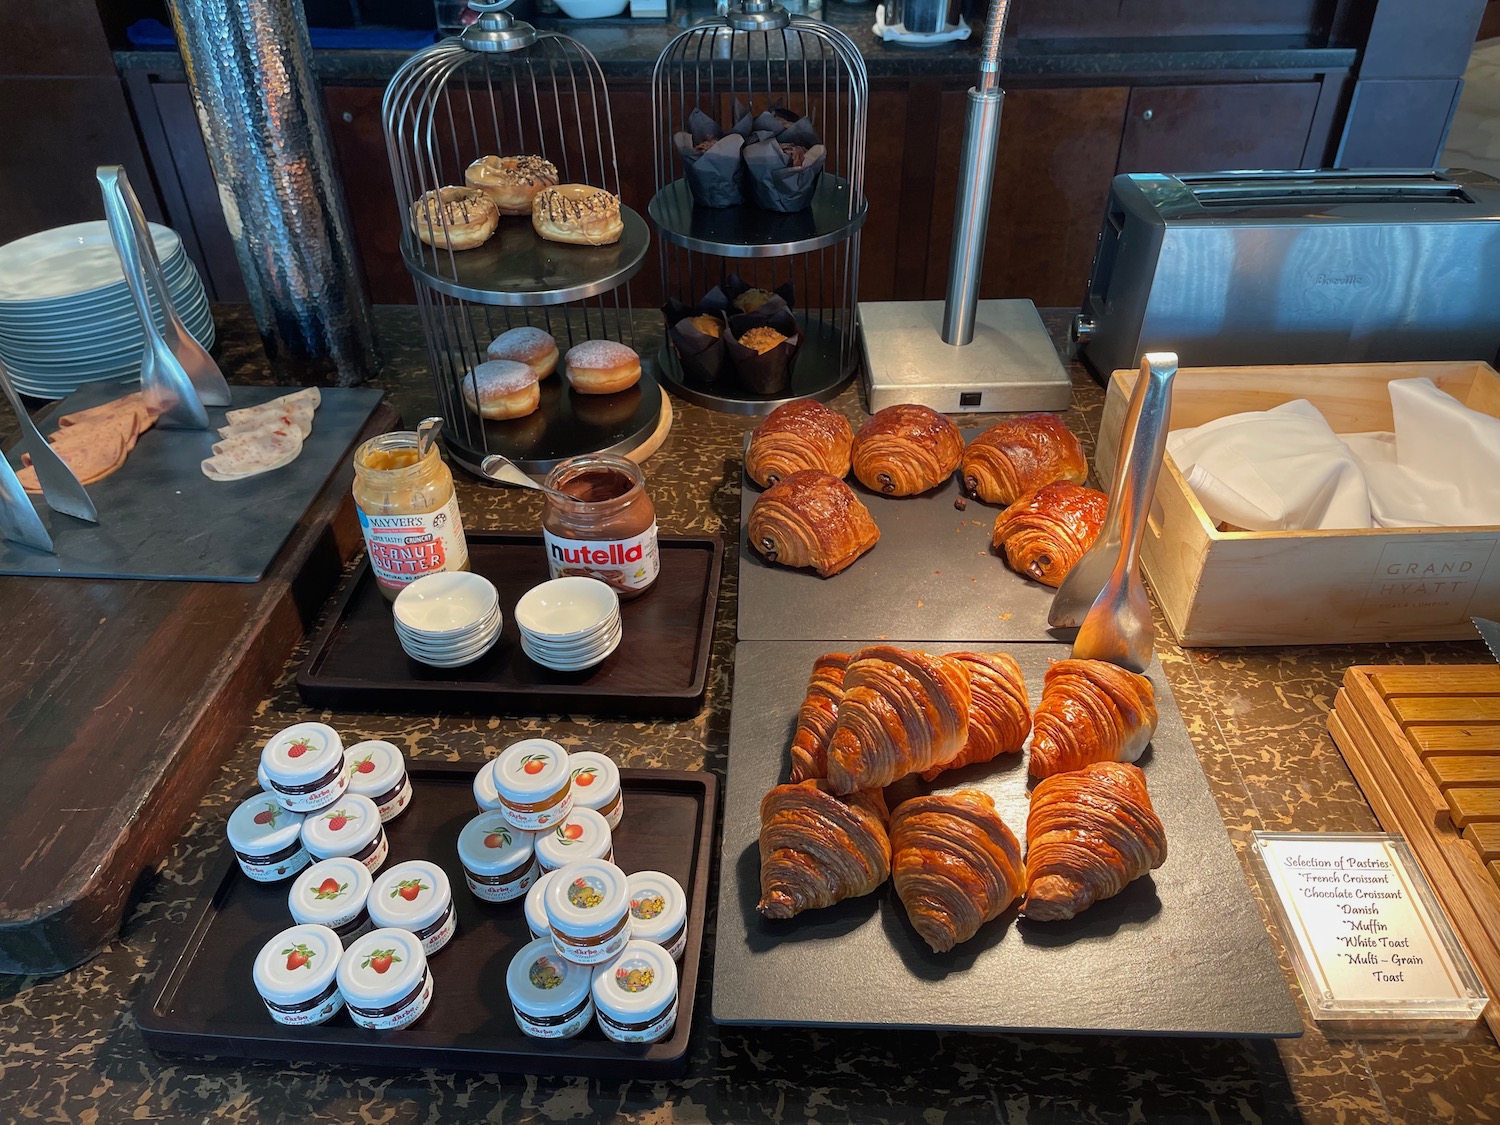 a table with pastries and pastries